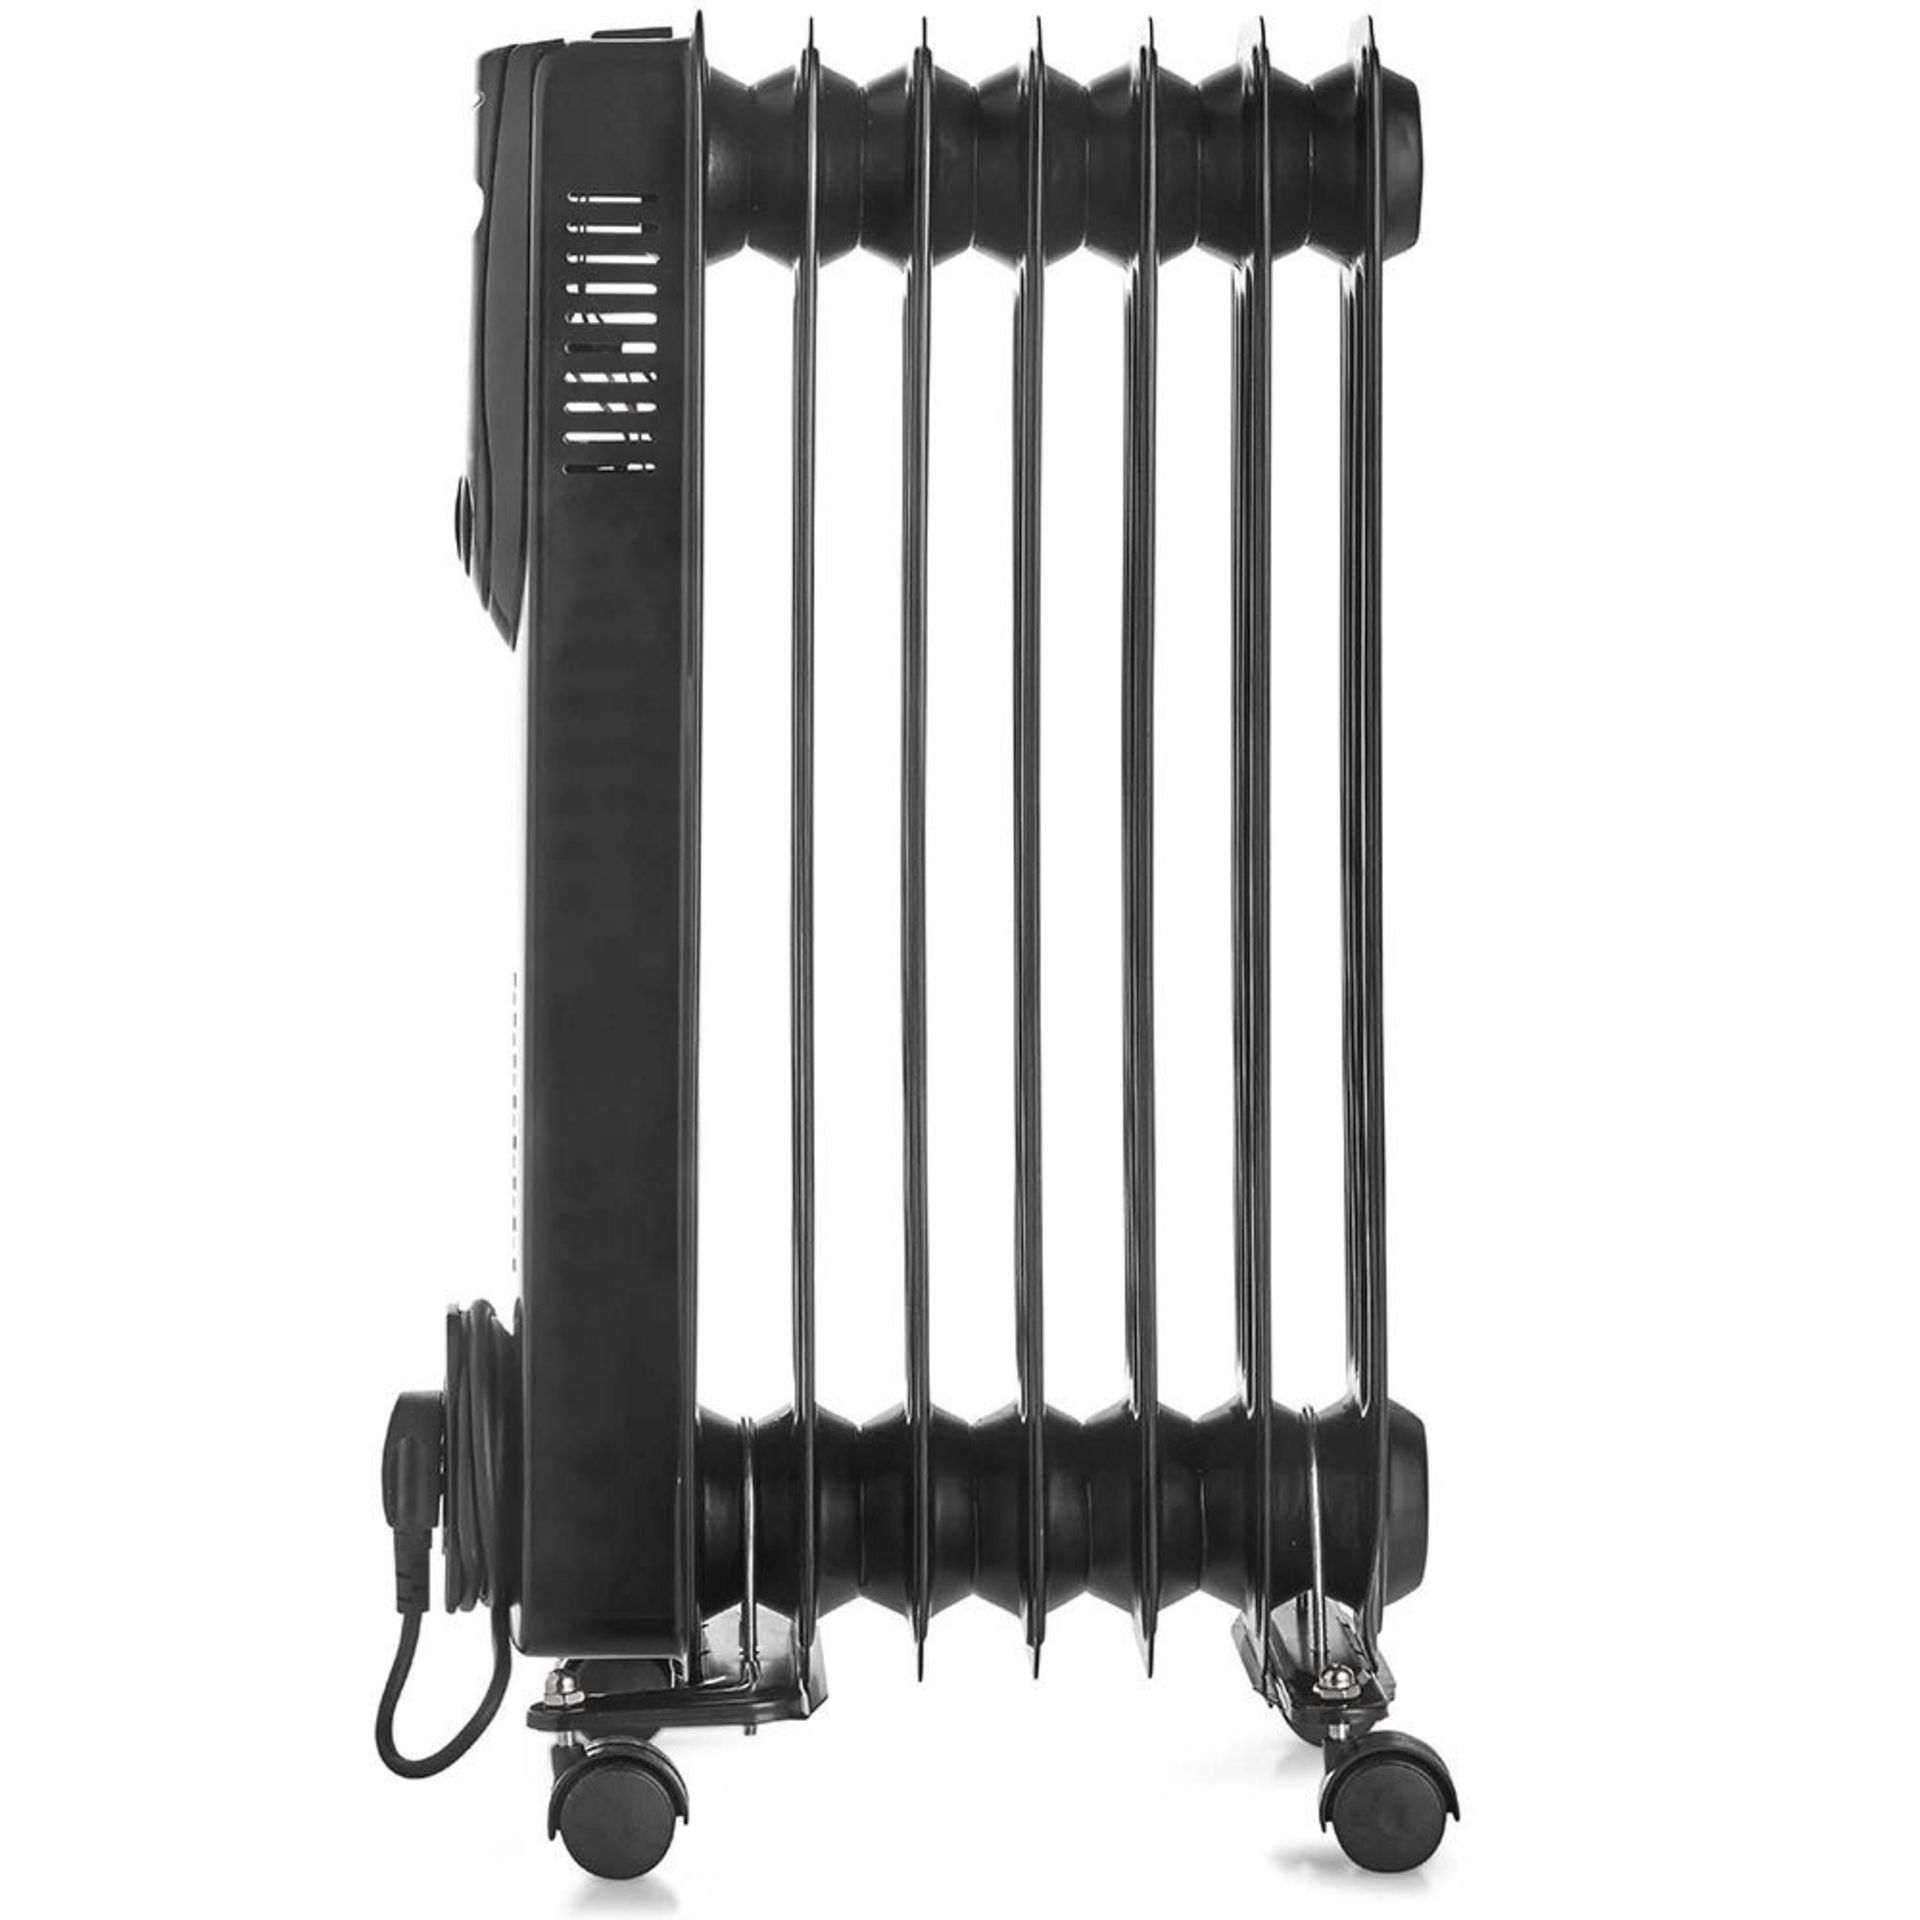 (H132) 7 Fin 1500W Oil Filled Radiator - Black Powerful 1500W radiator with 7 oil-filled fins ...( - Image 4 of 4